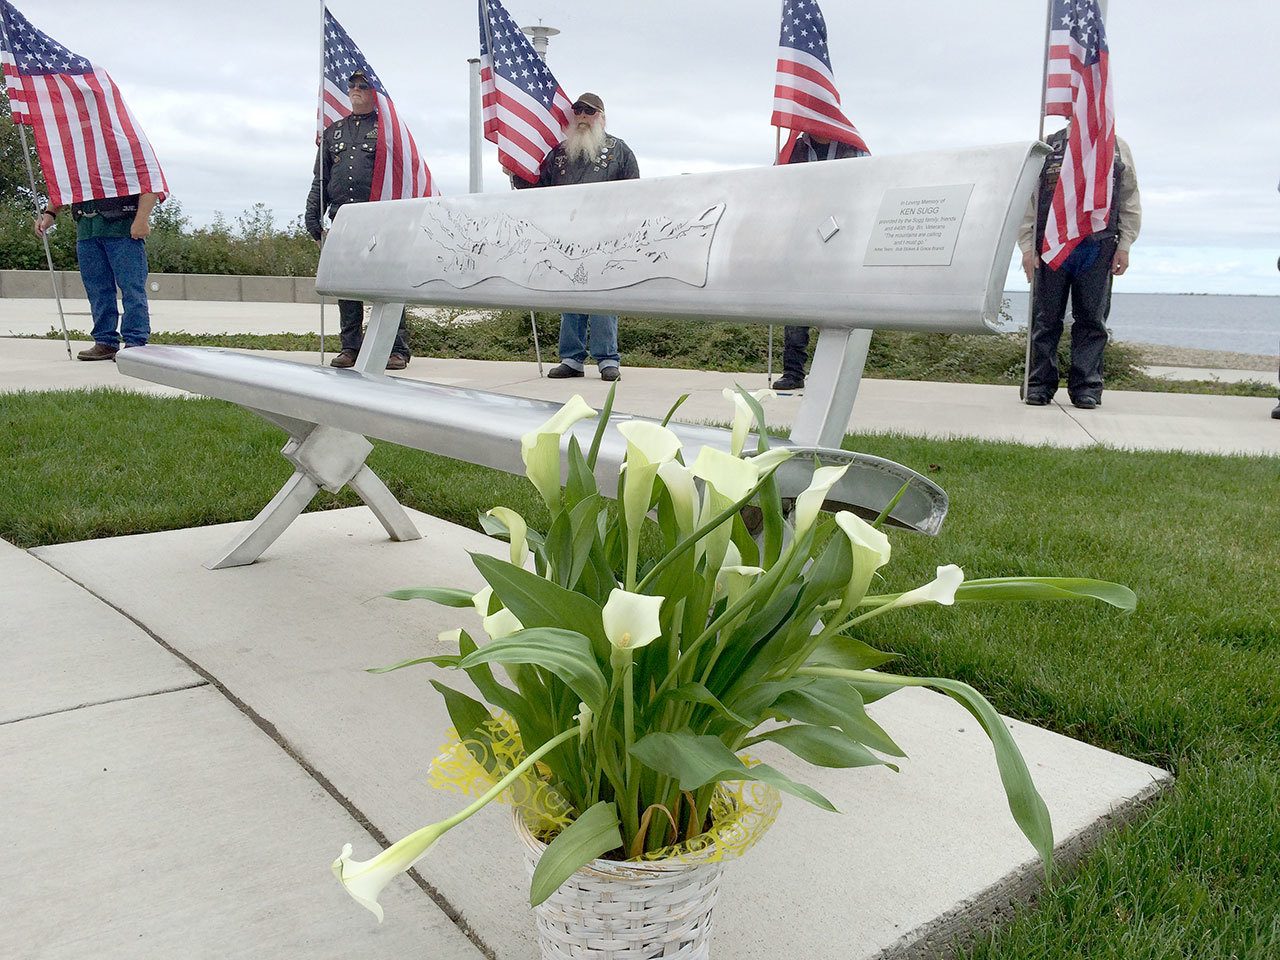 Friends and family of Army veteran Ken Sugg dedicated a bench in his name Saturday in Port Angeles waterfront park. (Mark Swanson/Peninsula Daily News)